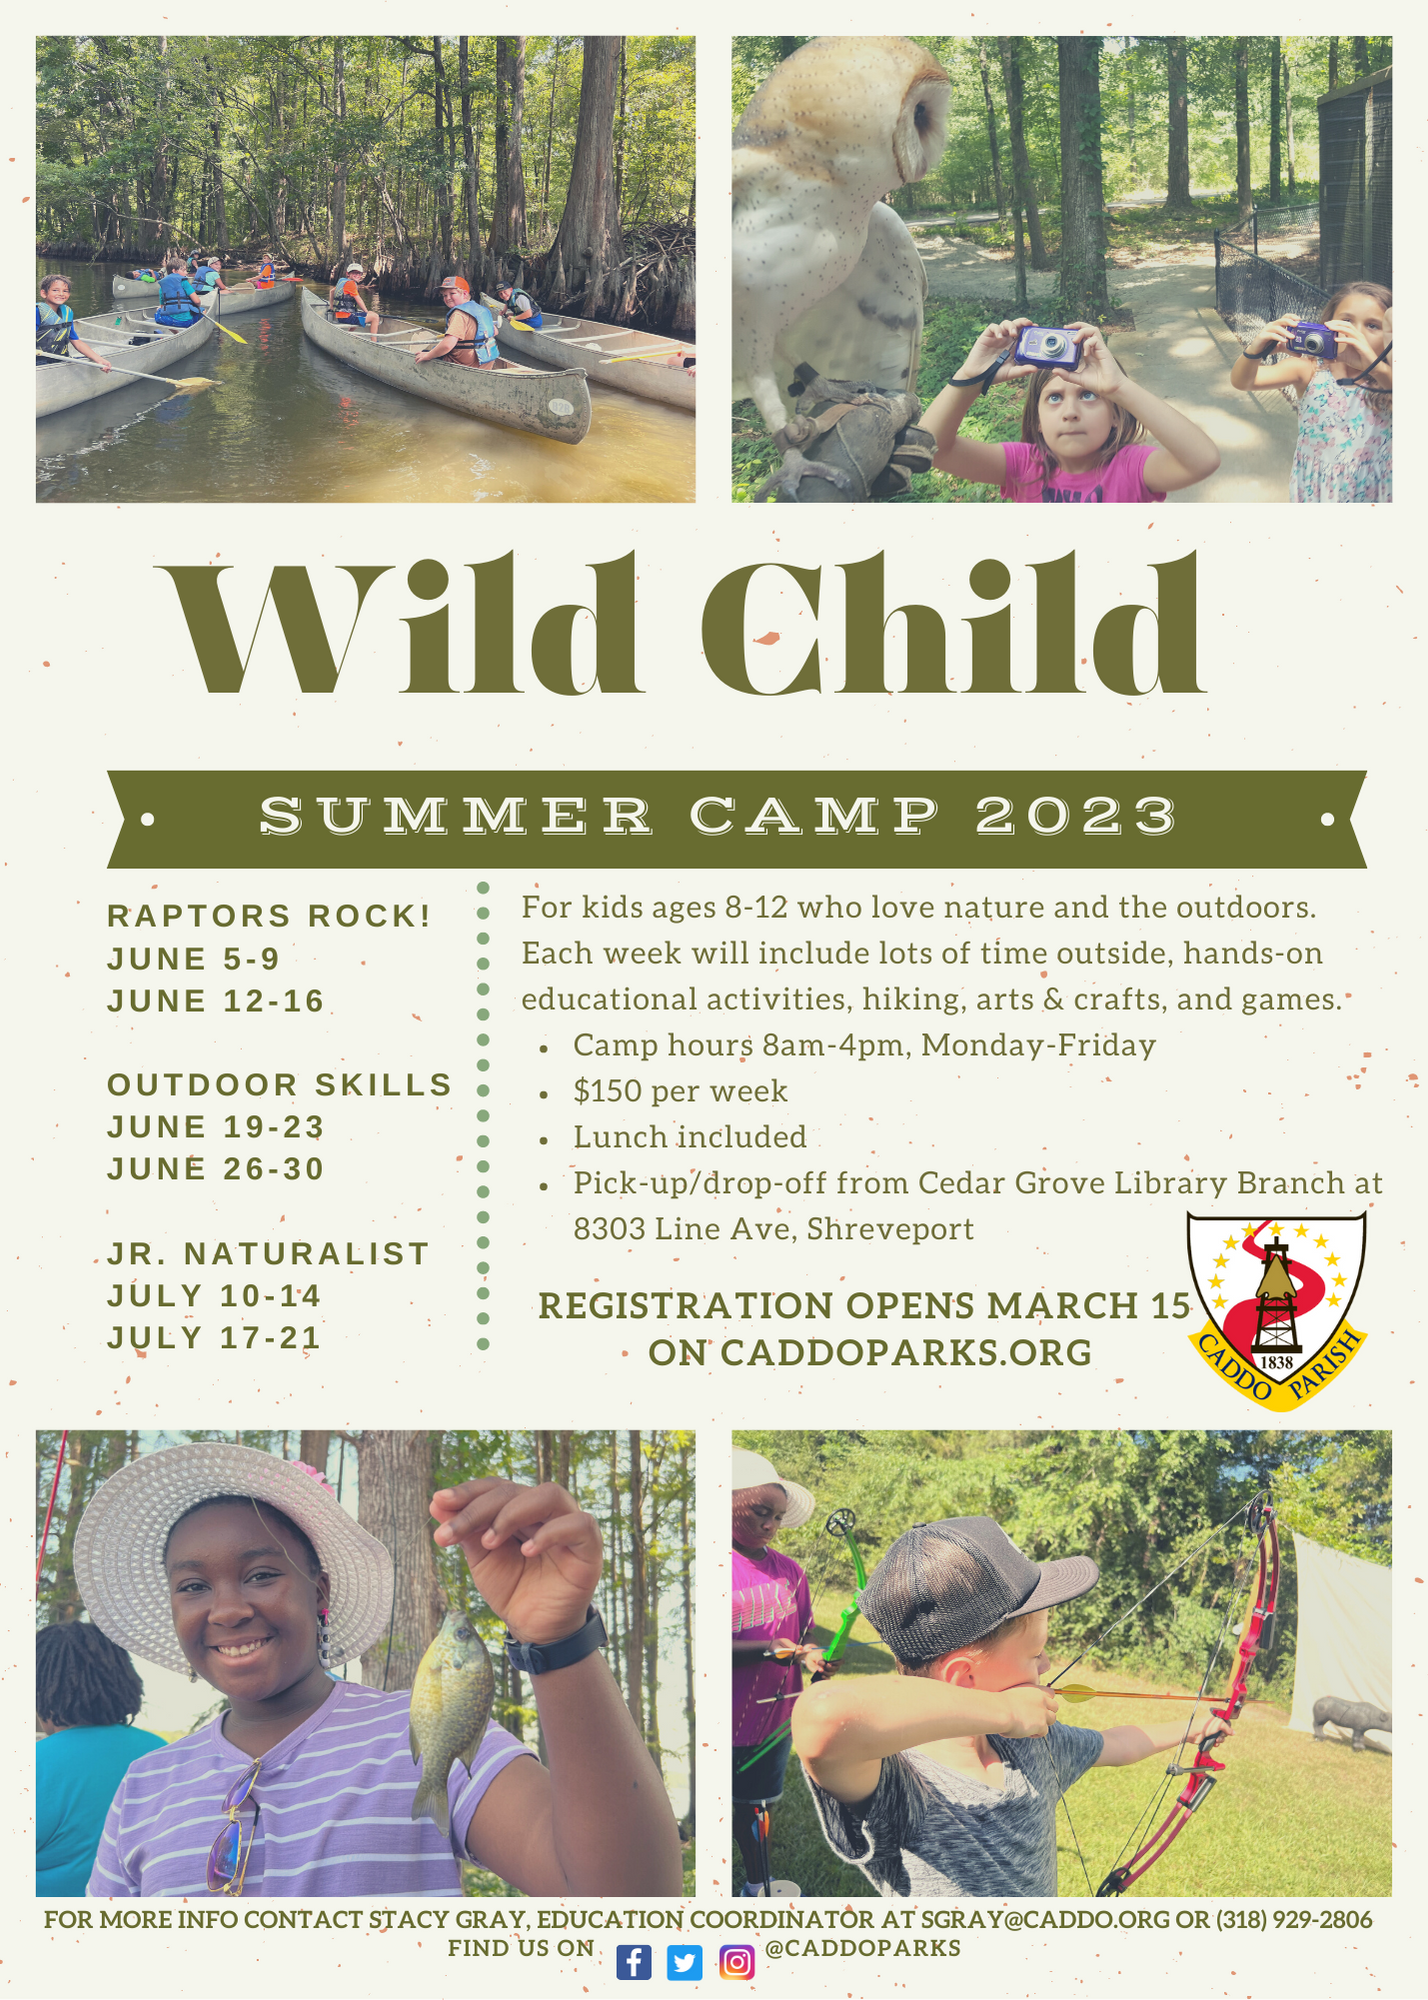 <h1 class="tribe-events-single-event-title">Wild Child Summer Camp 2023</h1>